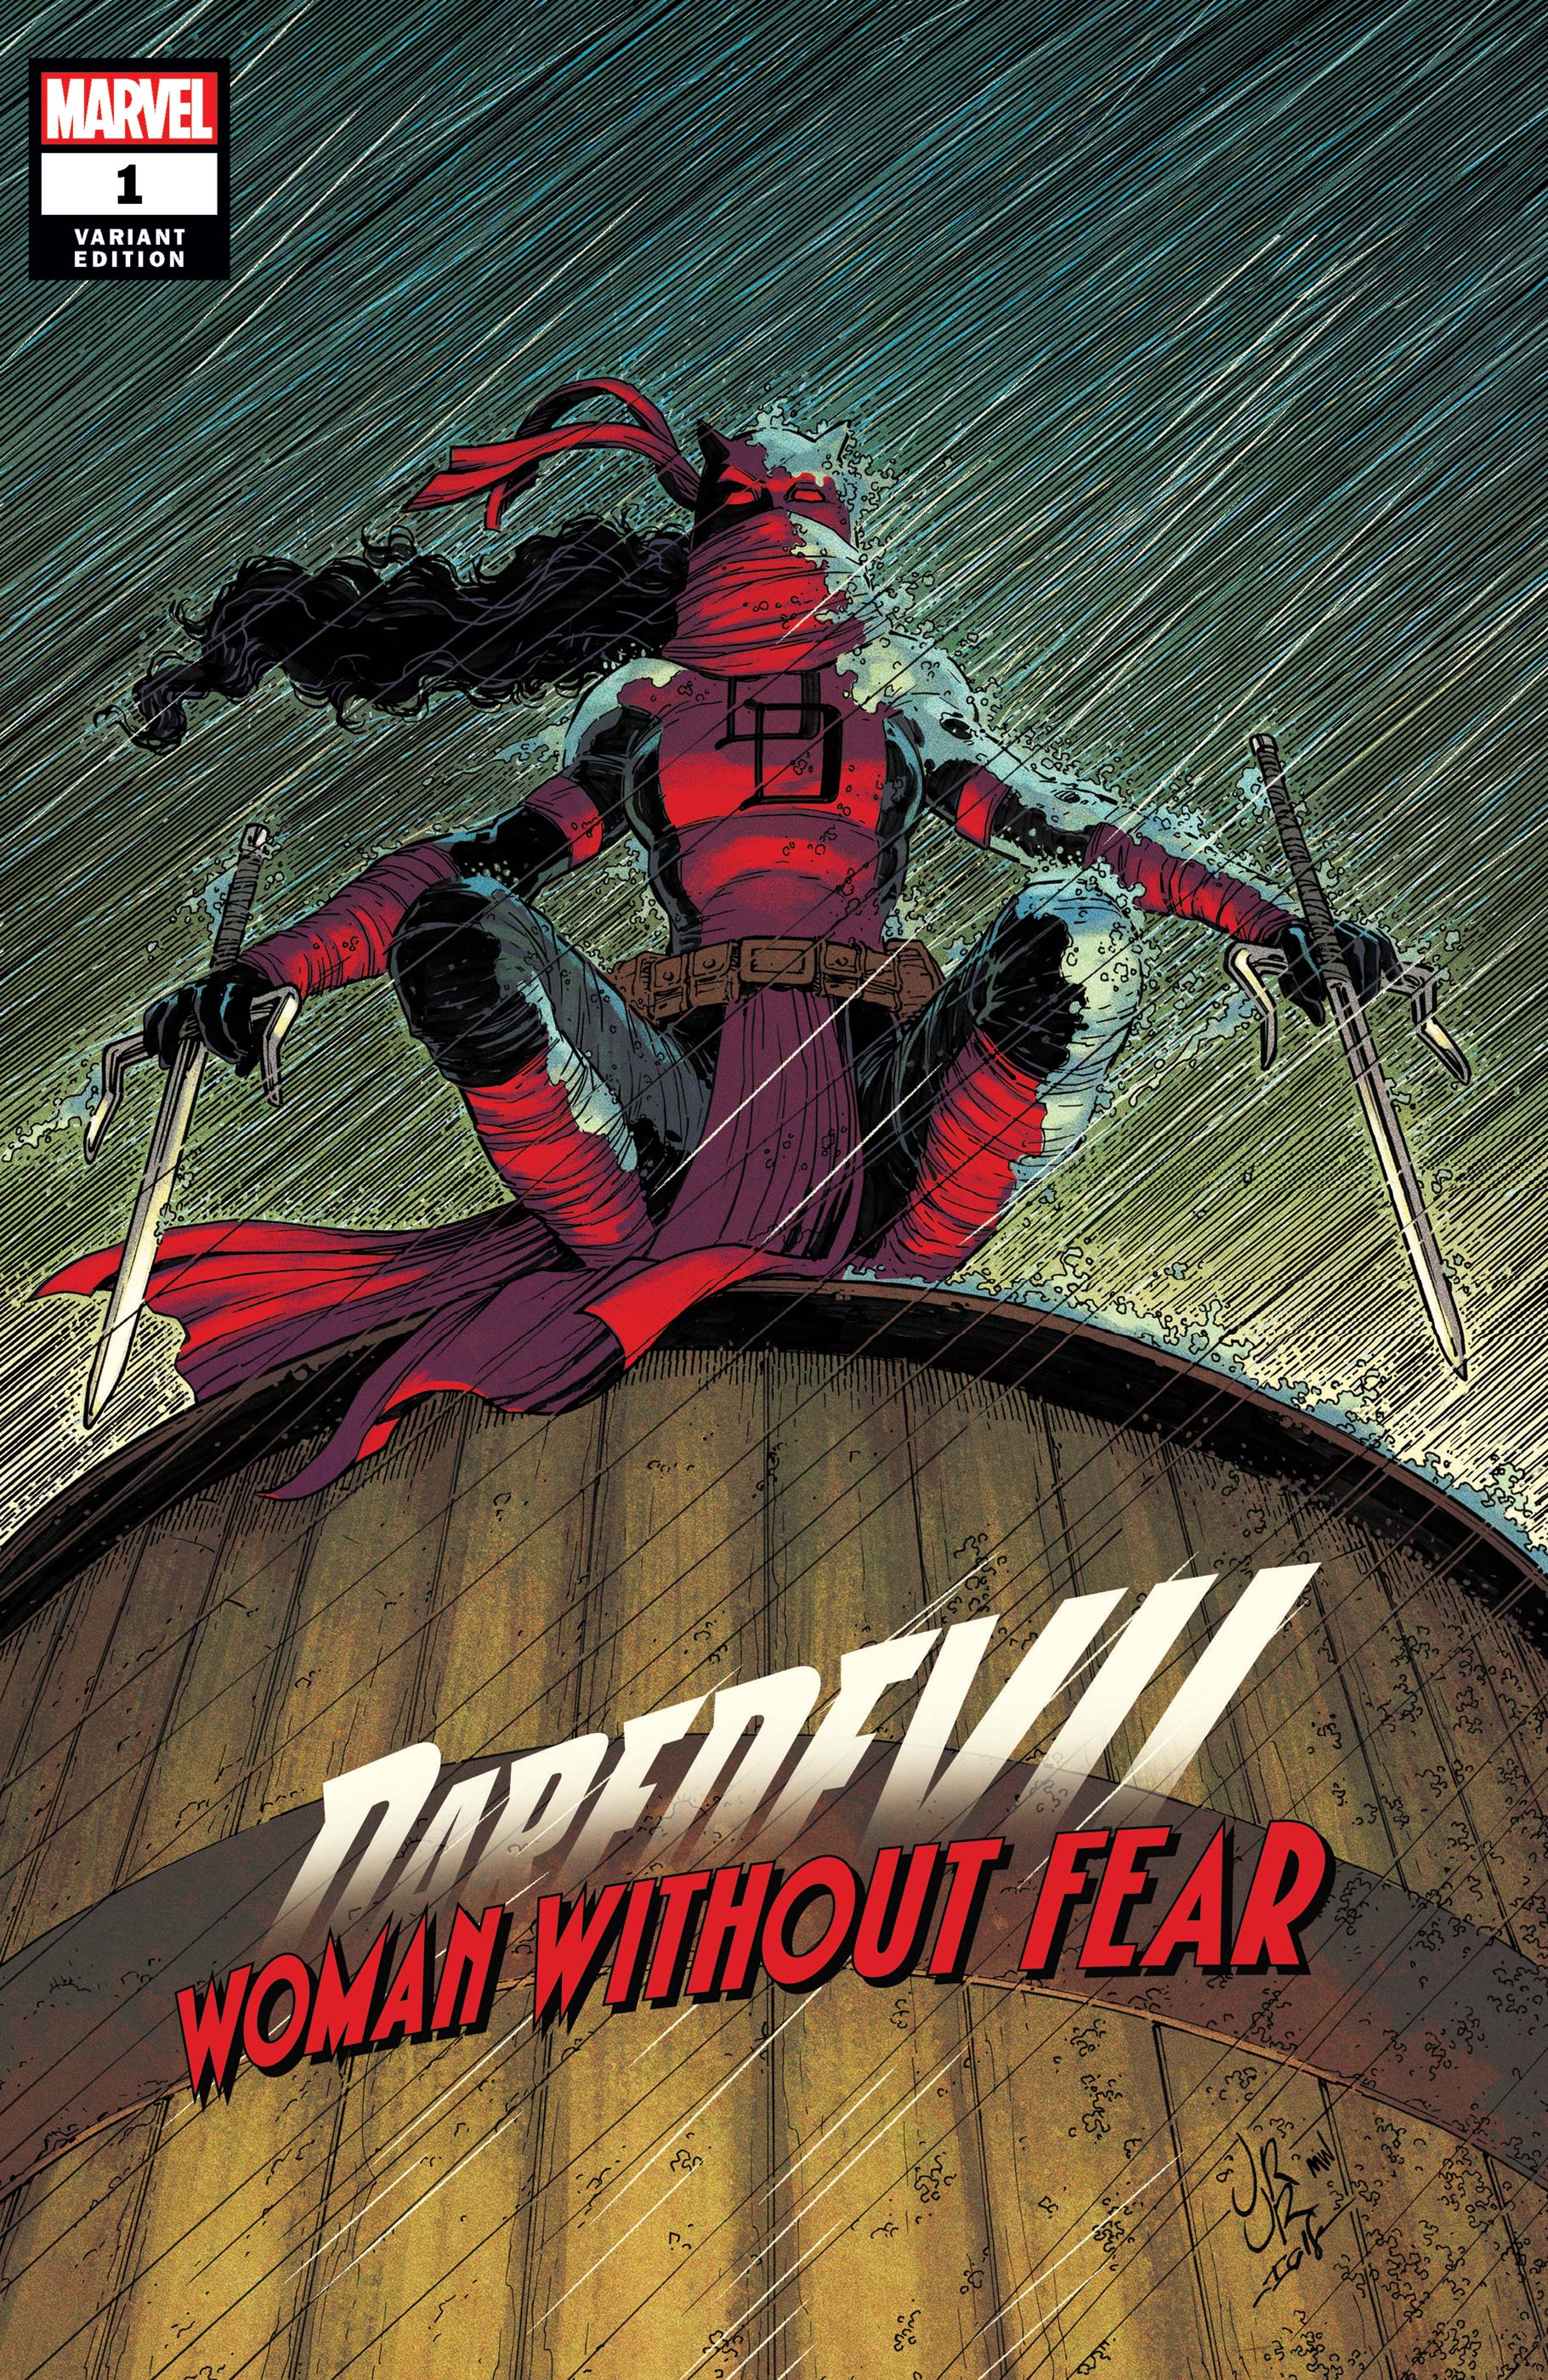 Daredevil: Woman Without Fear (2022) #1 (Variant)